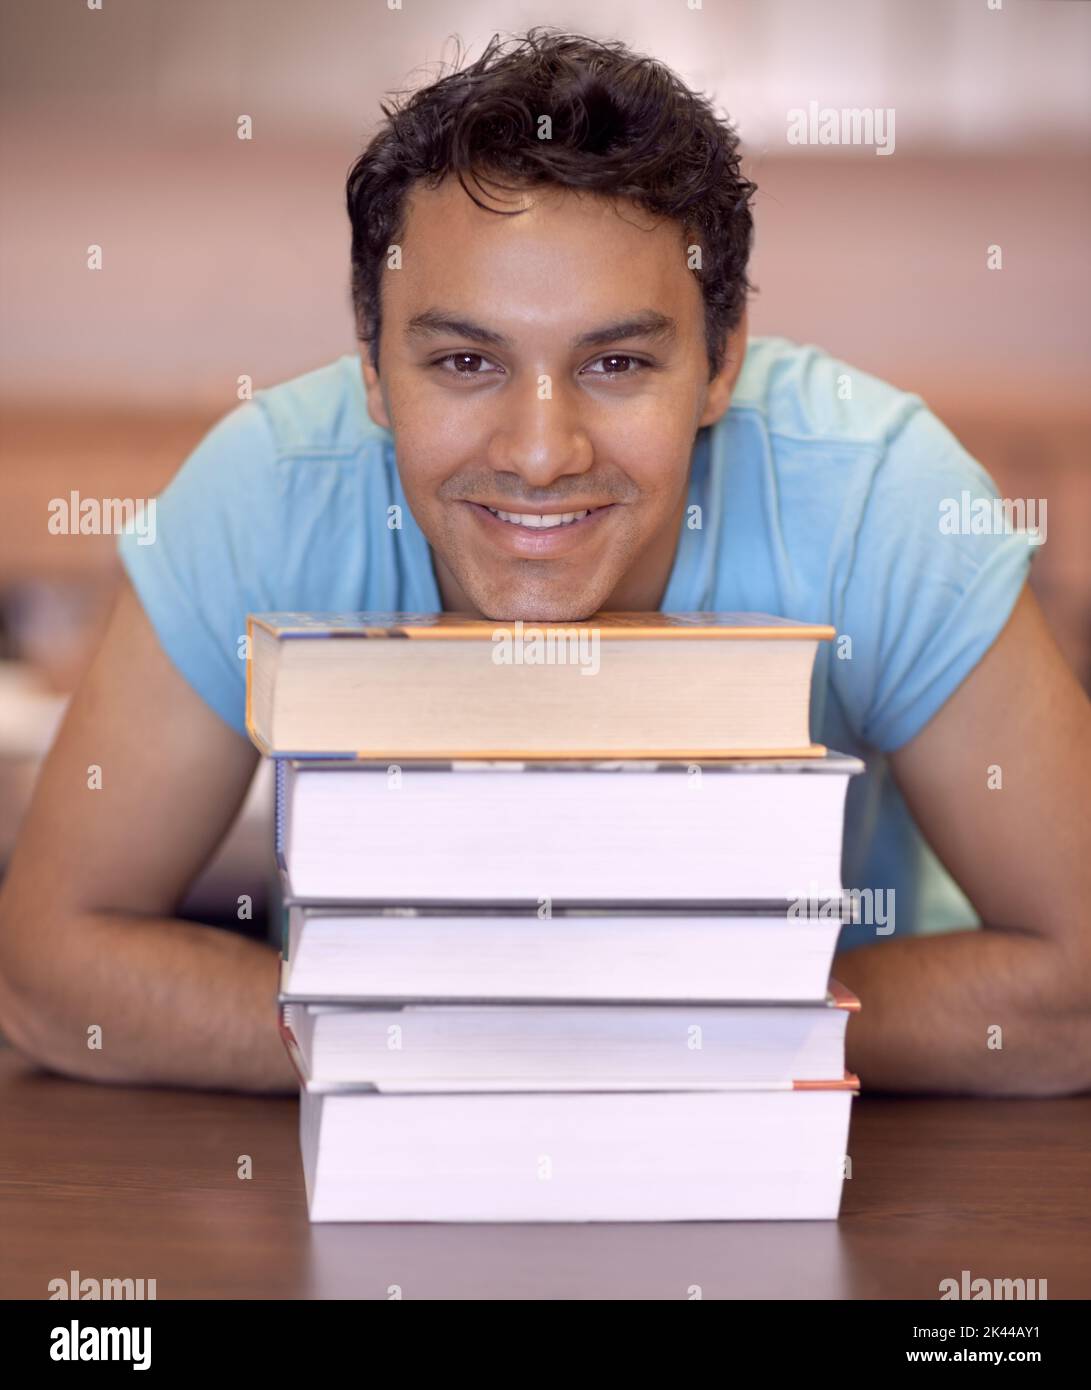 Hes eager to learn. Portrait of a young man sitting down and resting his head on some textbooks. Stock Photo